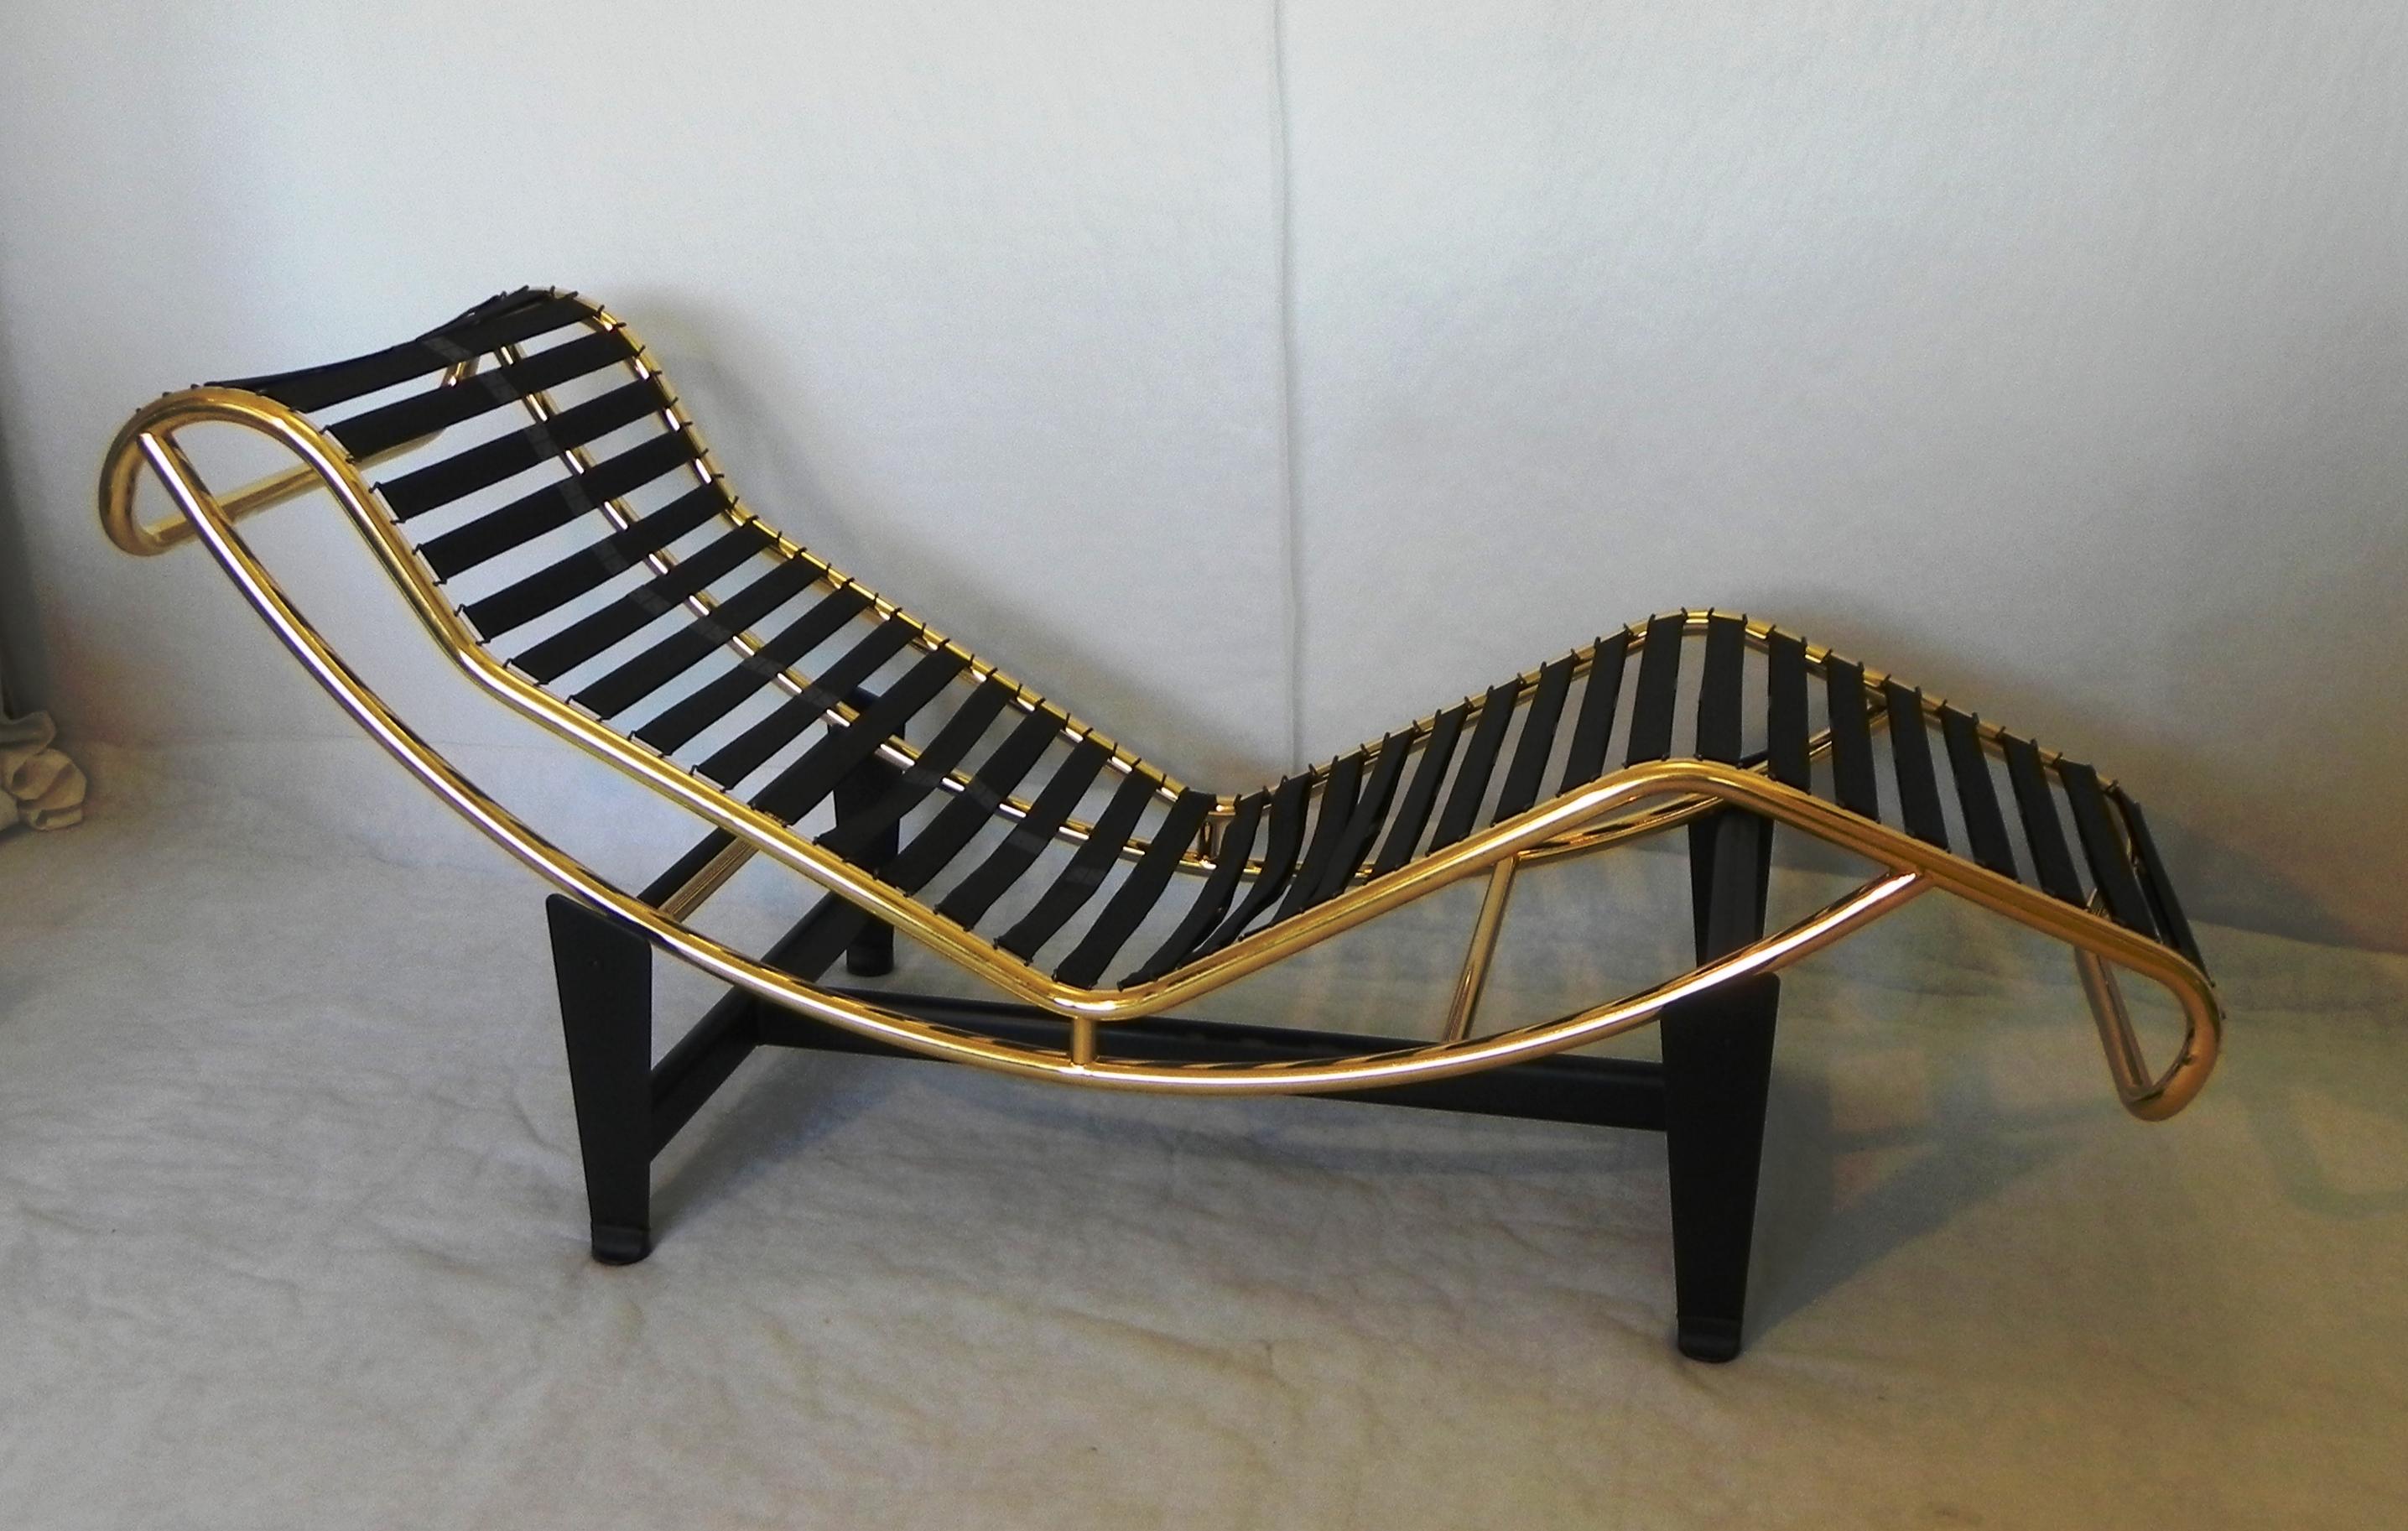 European Chaise Longue, limited edition - Gold